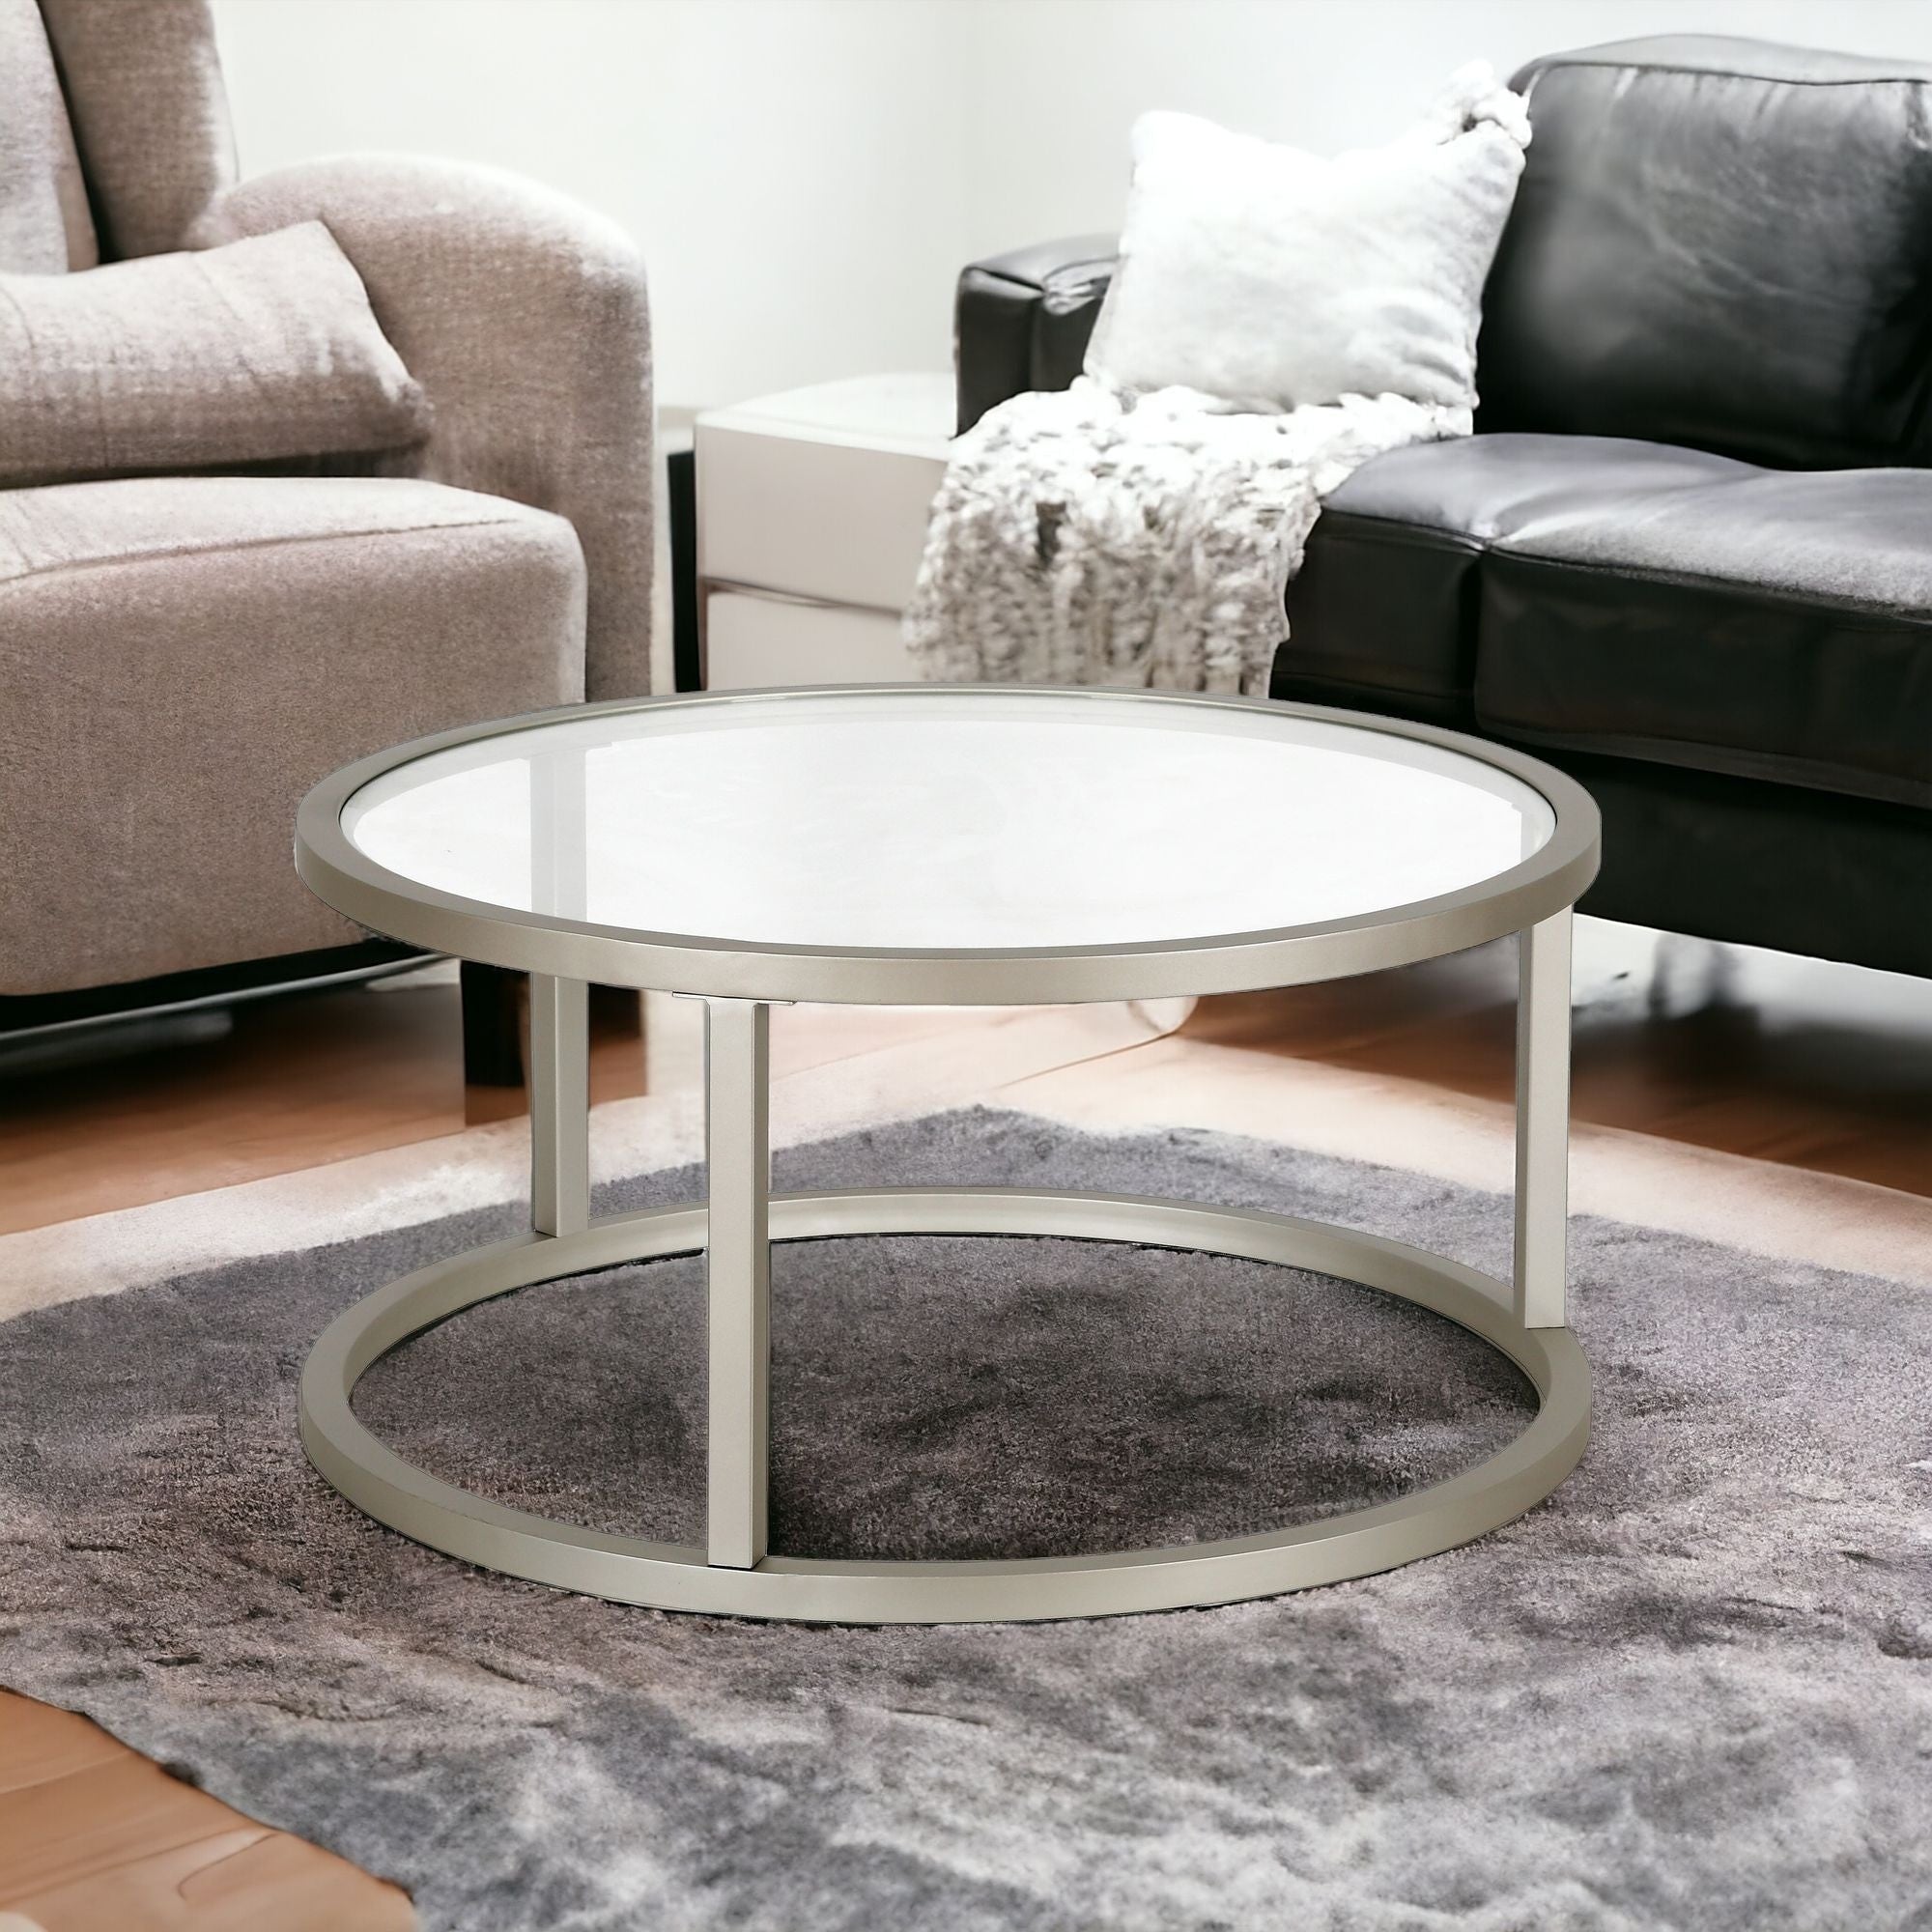 35" Silver Glass And Steel Round Coffee Table